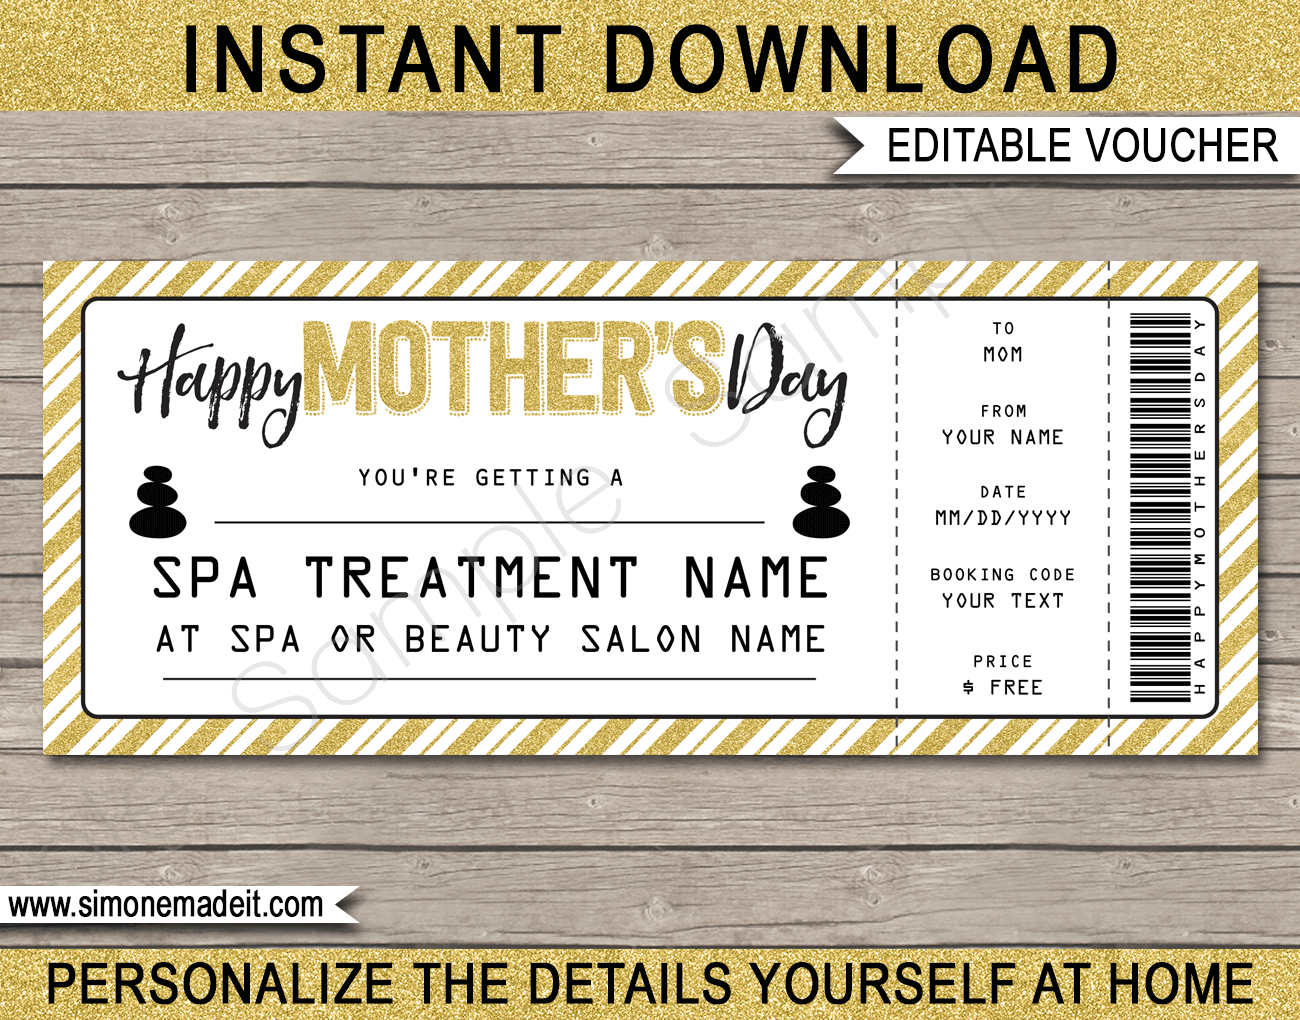 https://www.giftsbysimonemadeit.com/wp-content/uploads/2019/10/Mothers-Day-Spa-Voucher-Gift-Ticket-Printable-Template.png